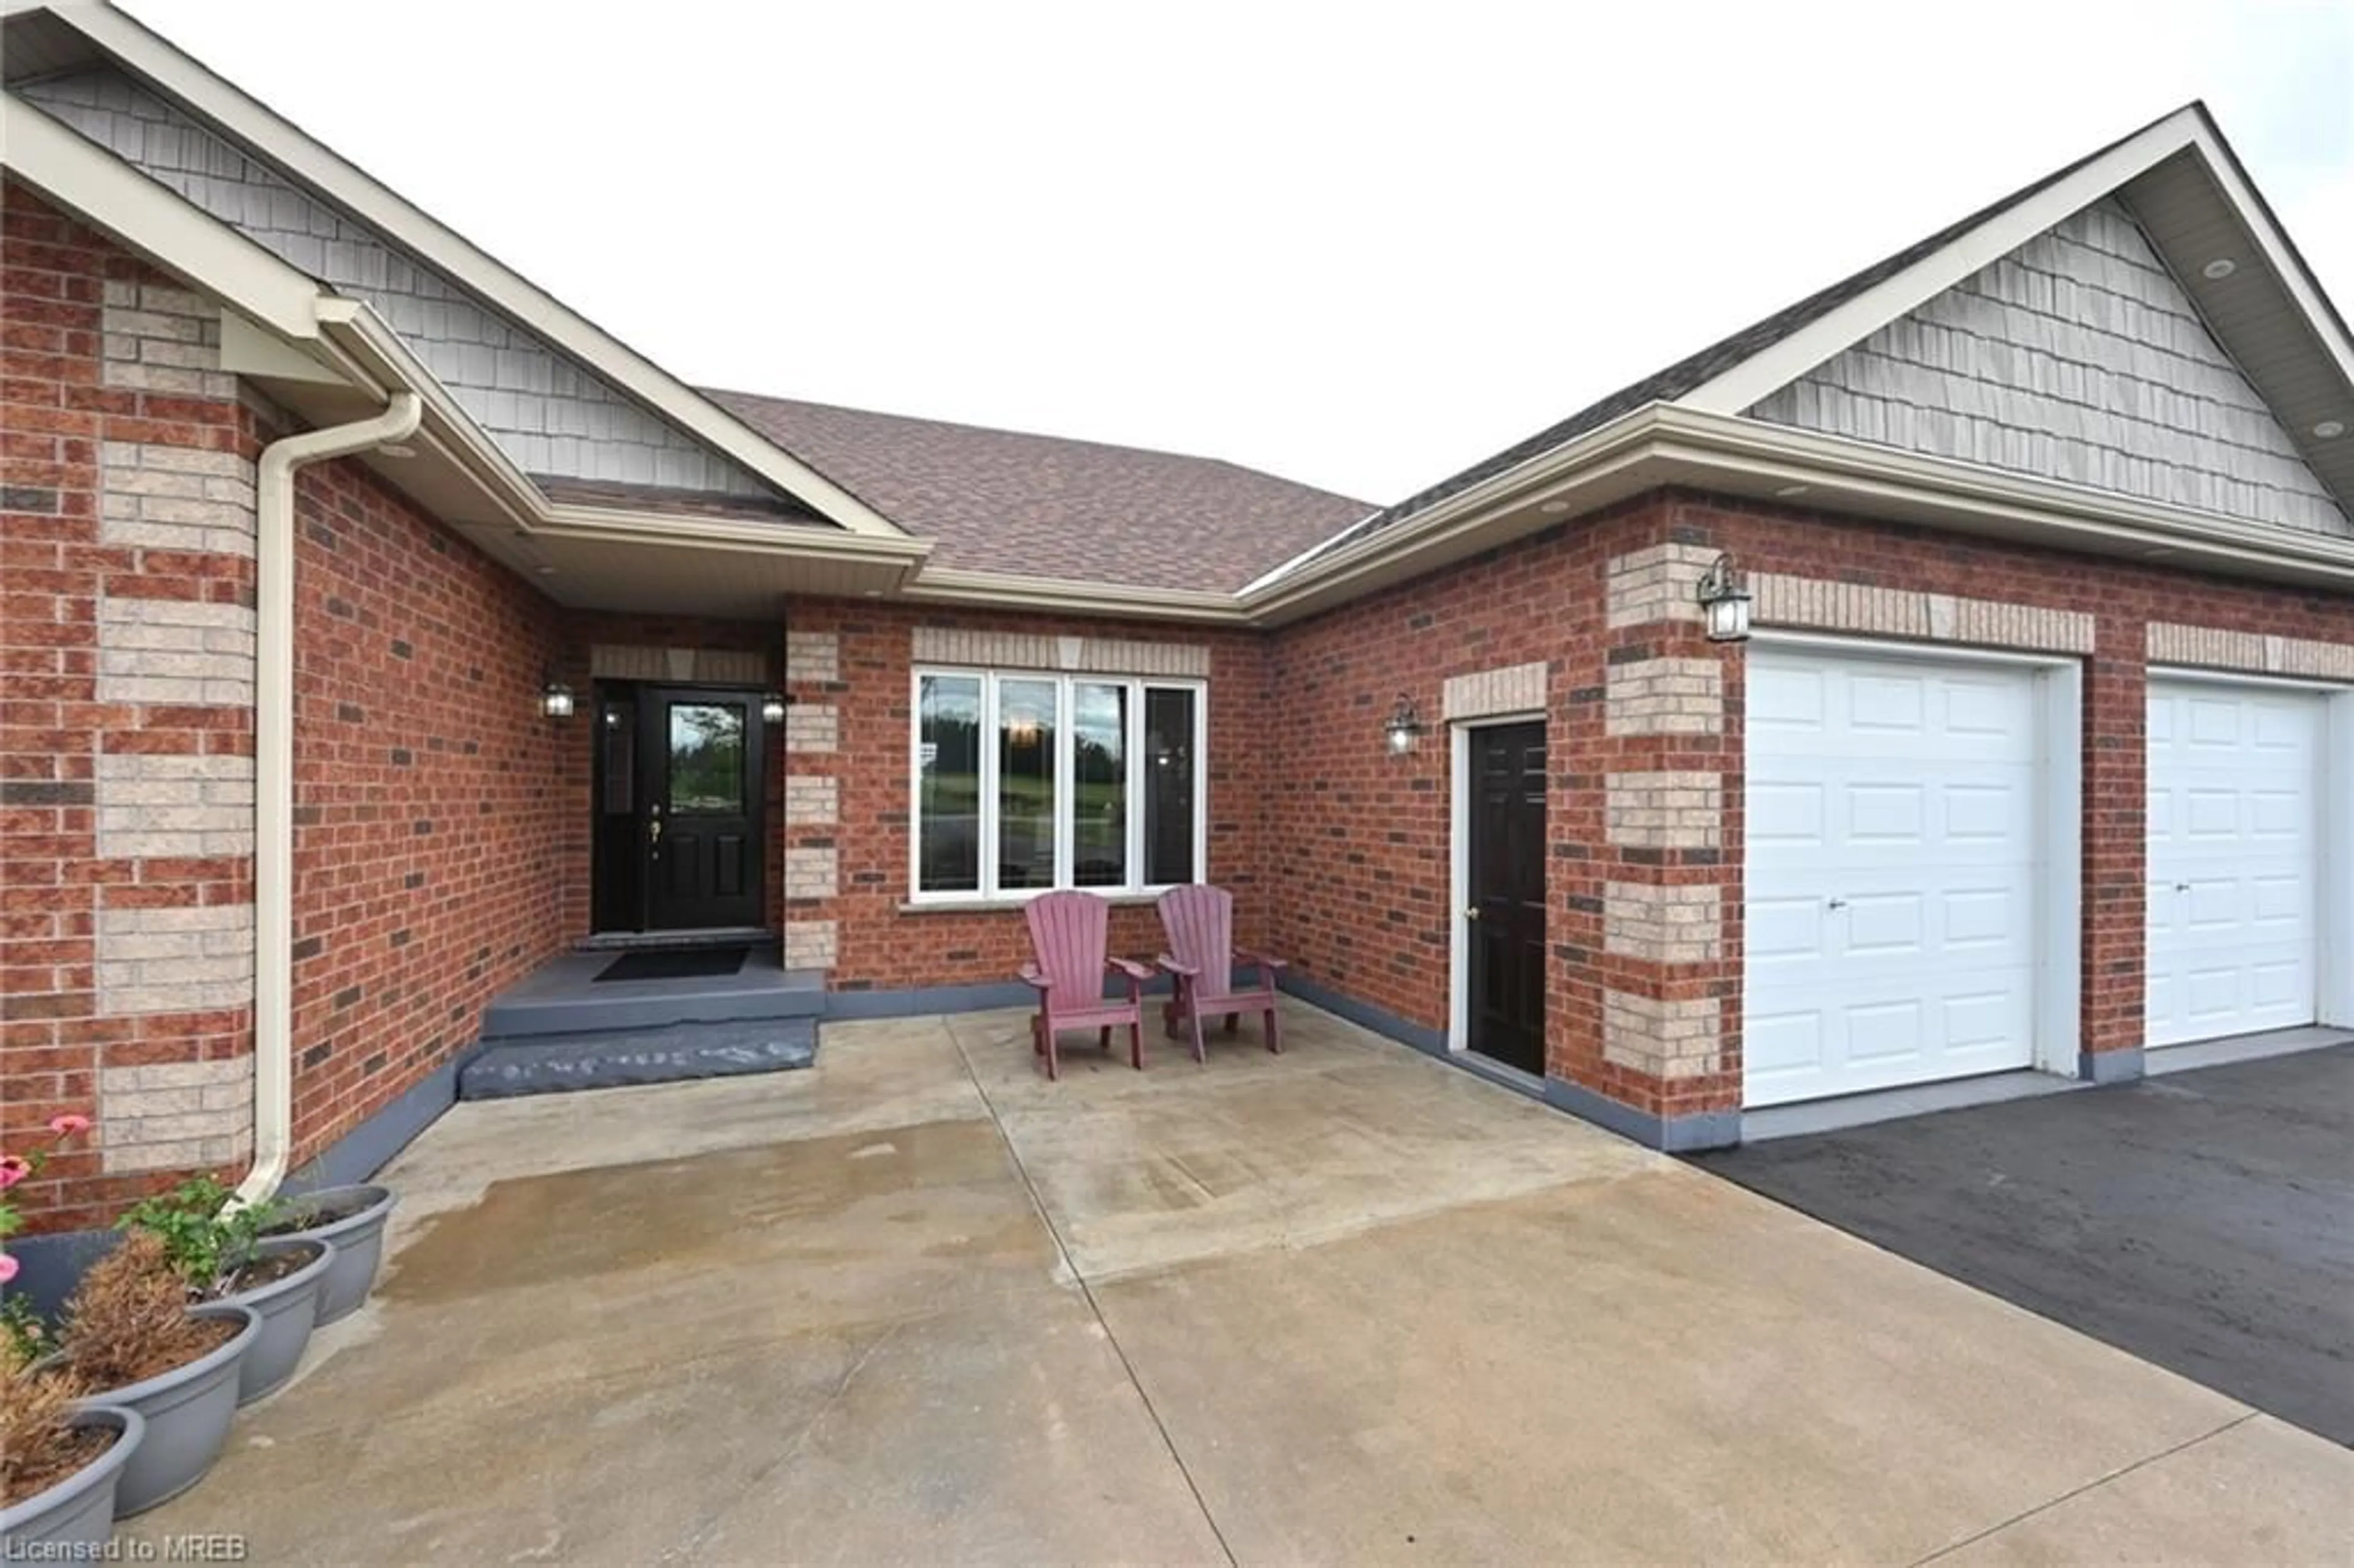 Home with brick exterior material for 5759 Concession 3 Rd, Simcoe Ontario L0M 1J0